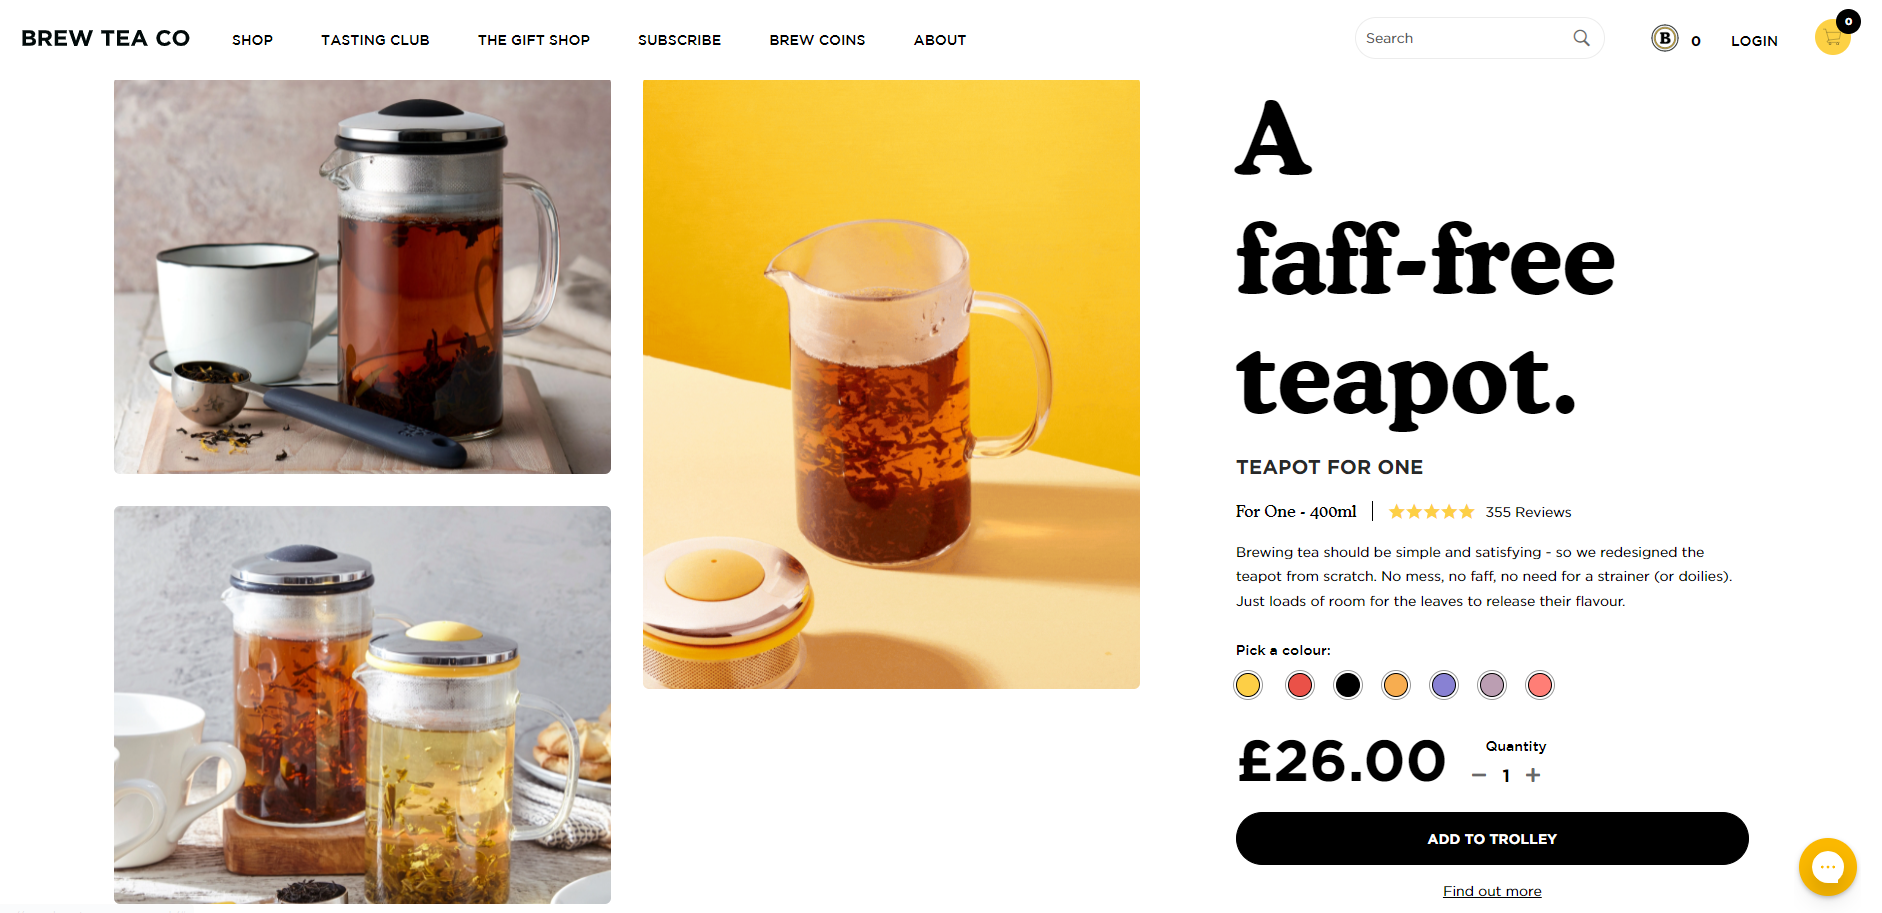 The Brew Tea Co. store represents the B2C ecommerce business model